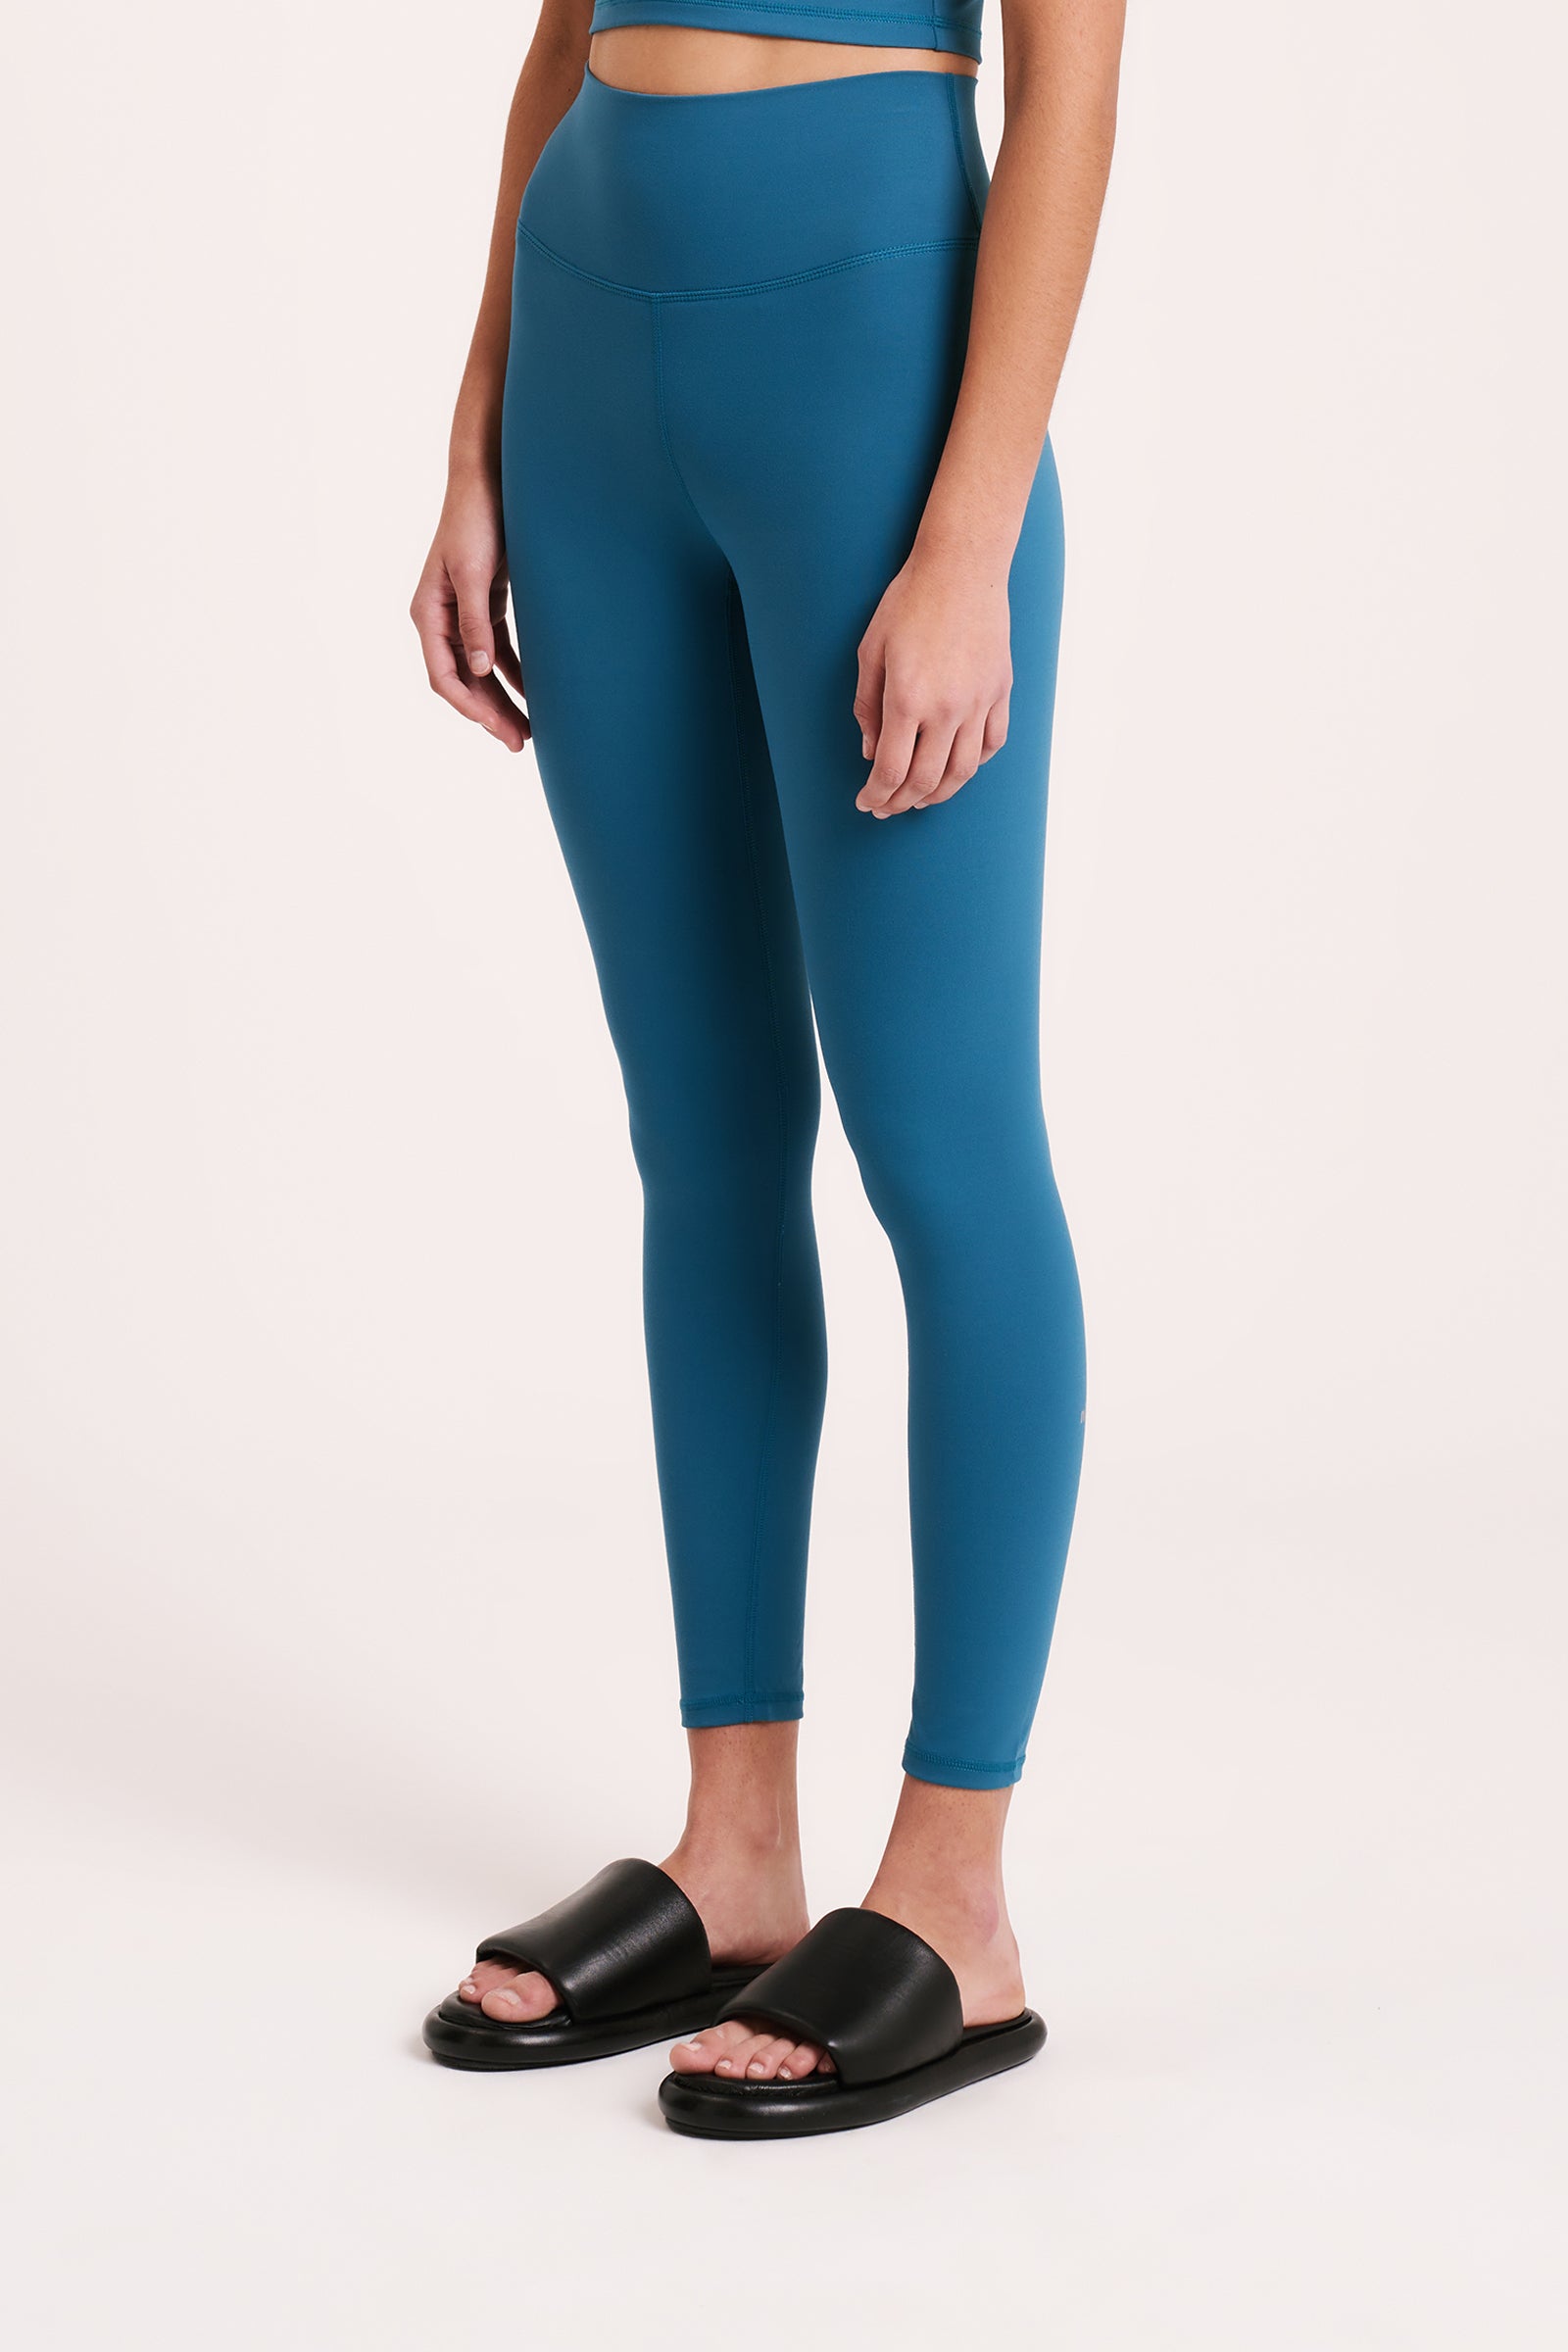 Shop Nude Active 7/8 Tights in Teal